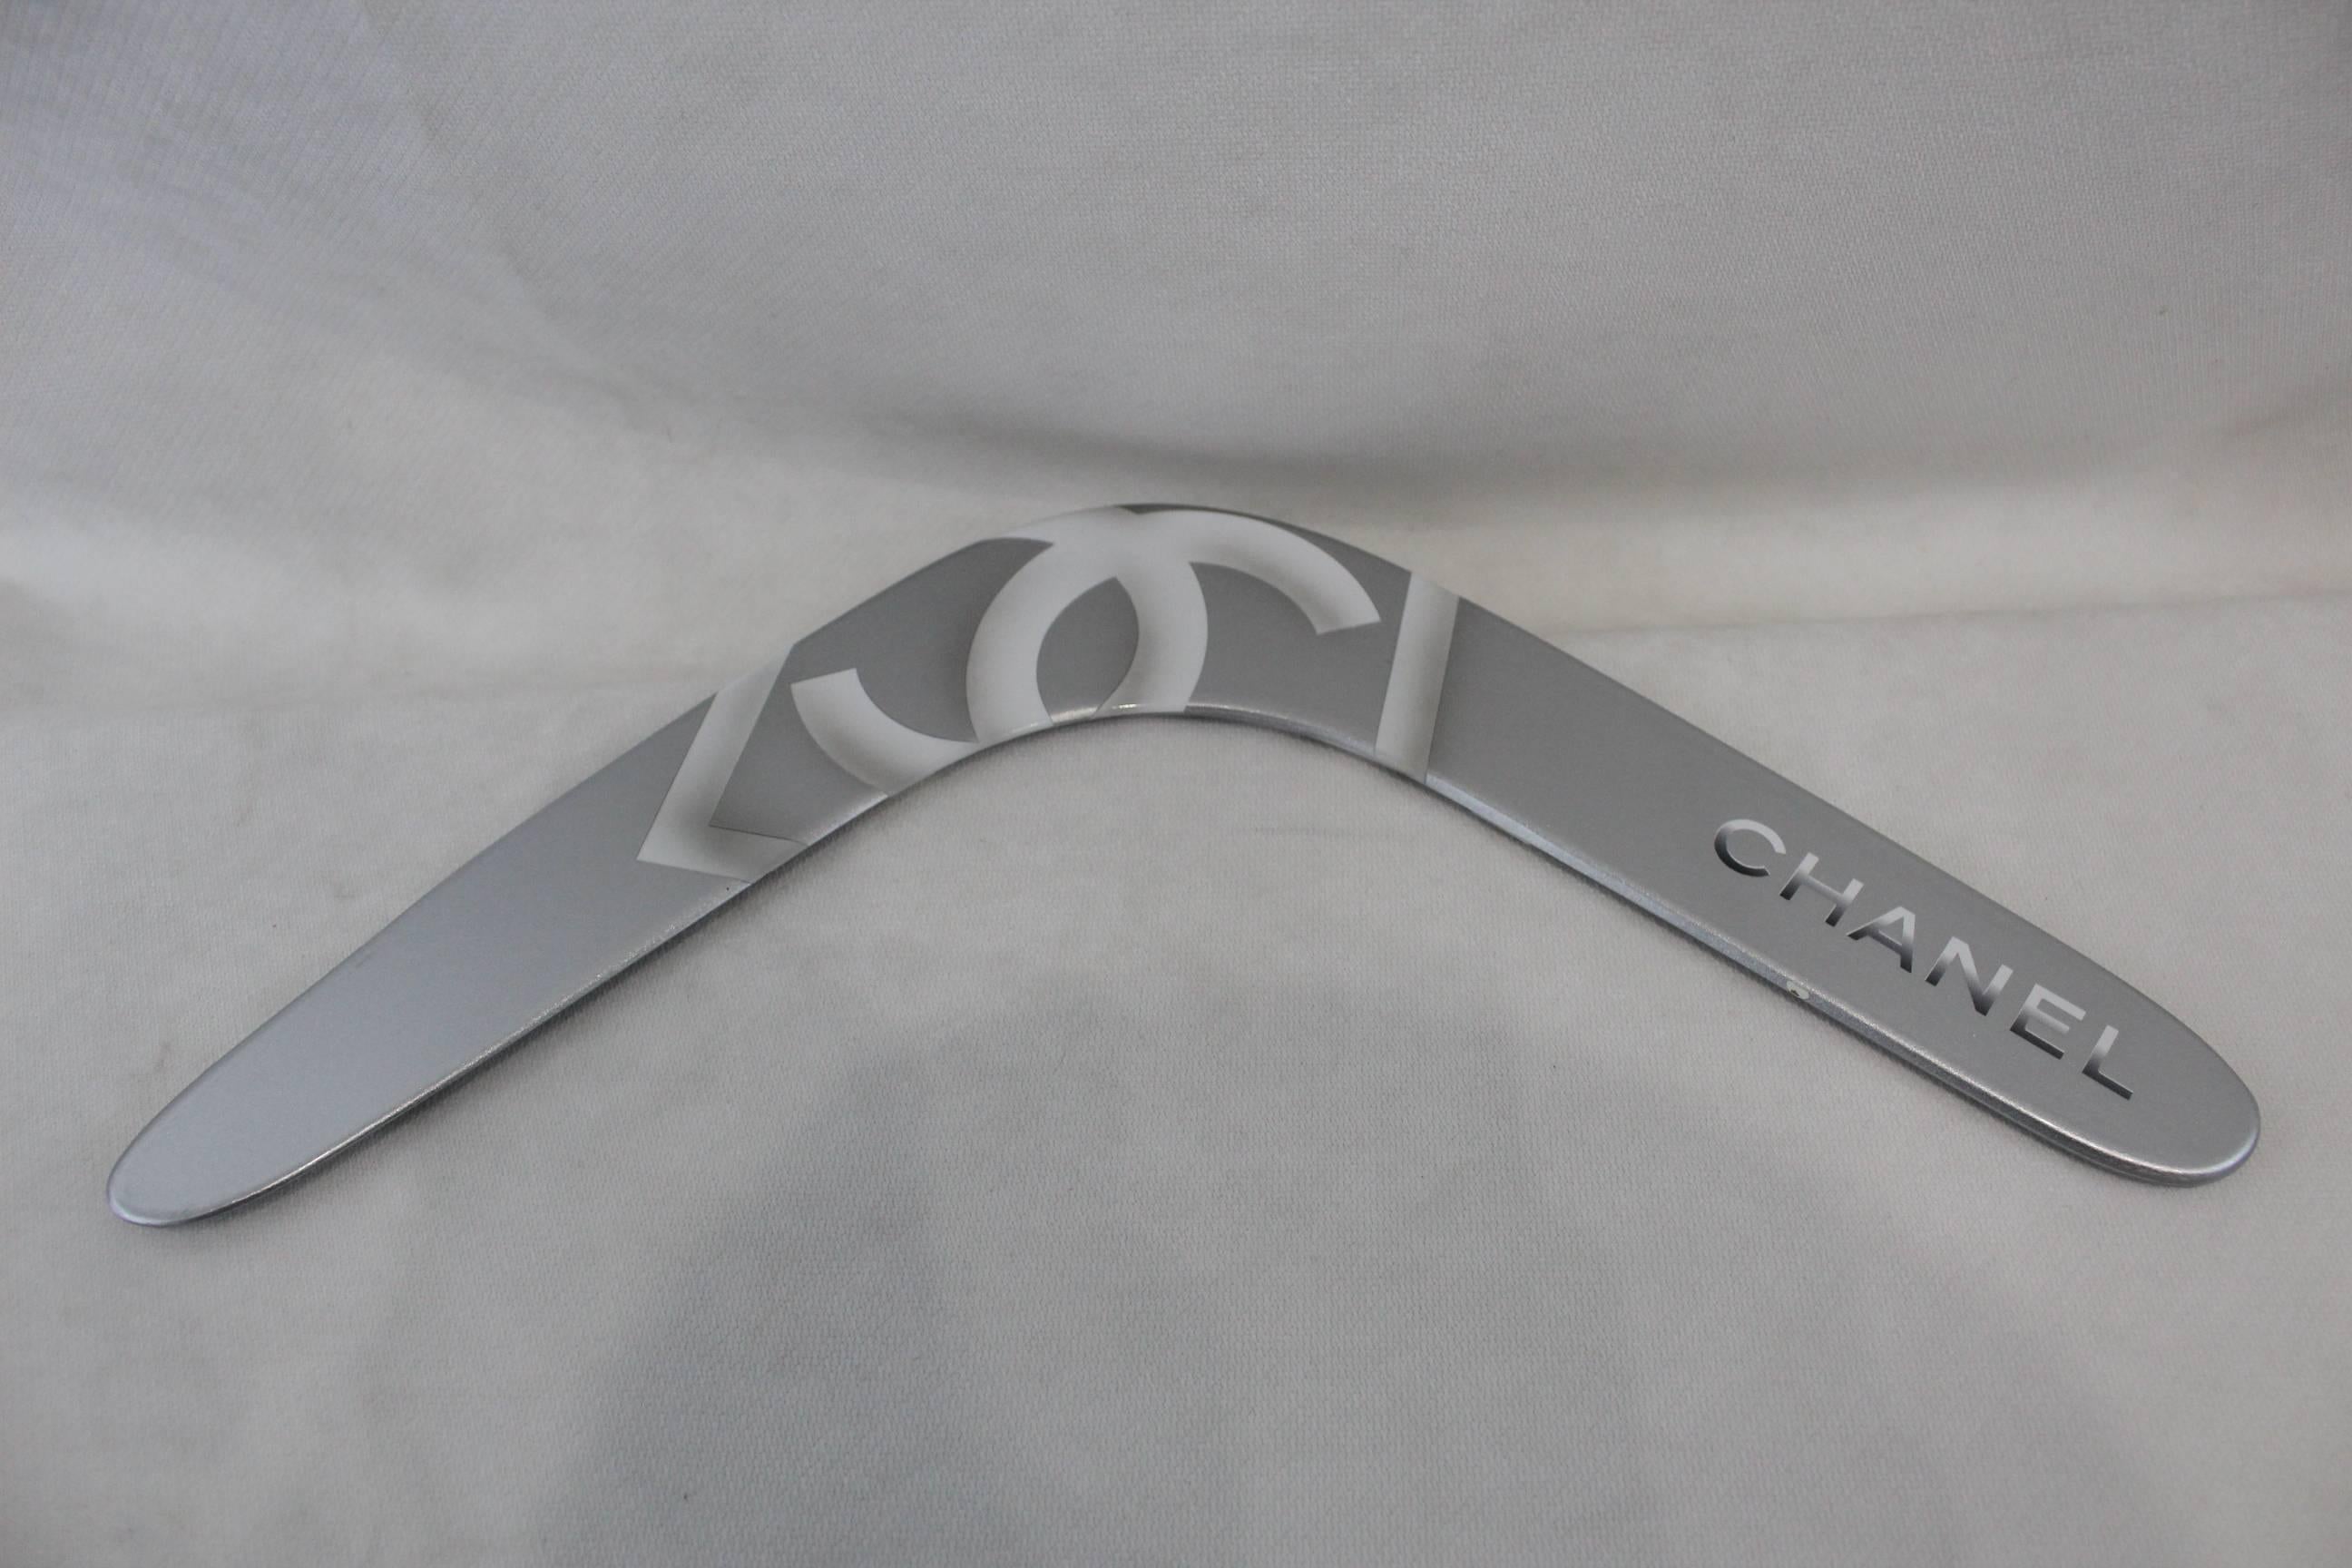 Really ncie Boomerang from Chanel. Collectible item. Hard to find.

Good condition, small chip on the silver paint (see images)